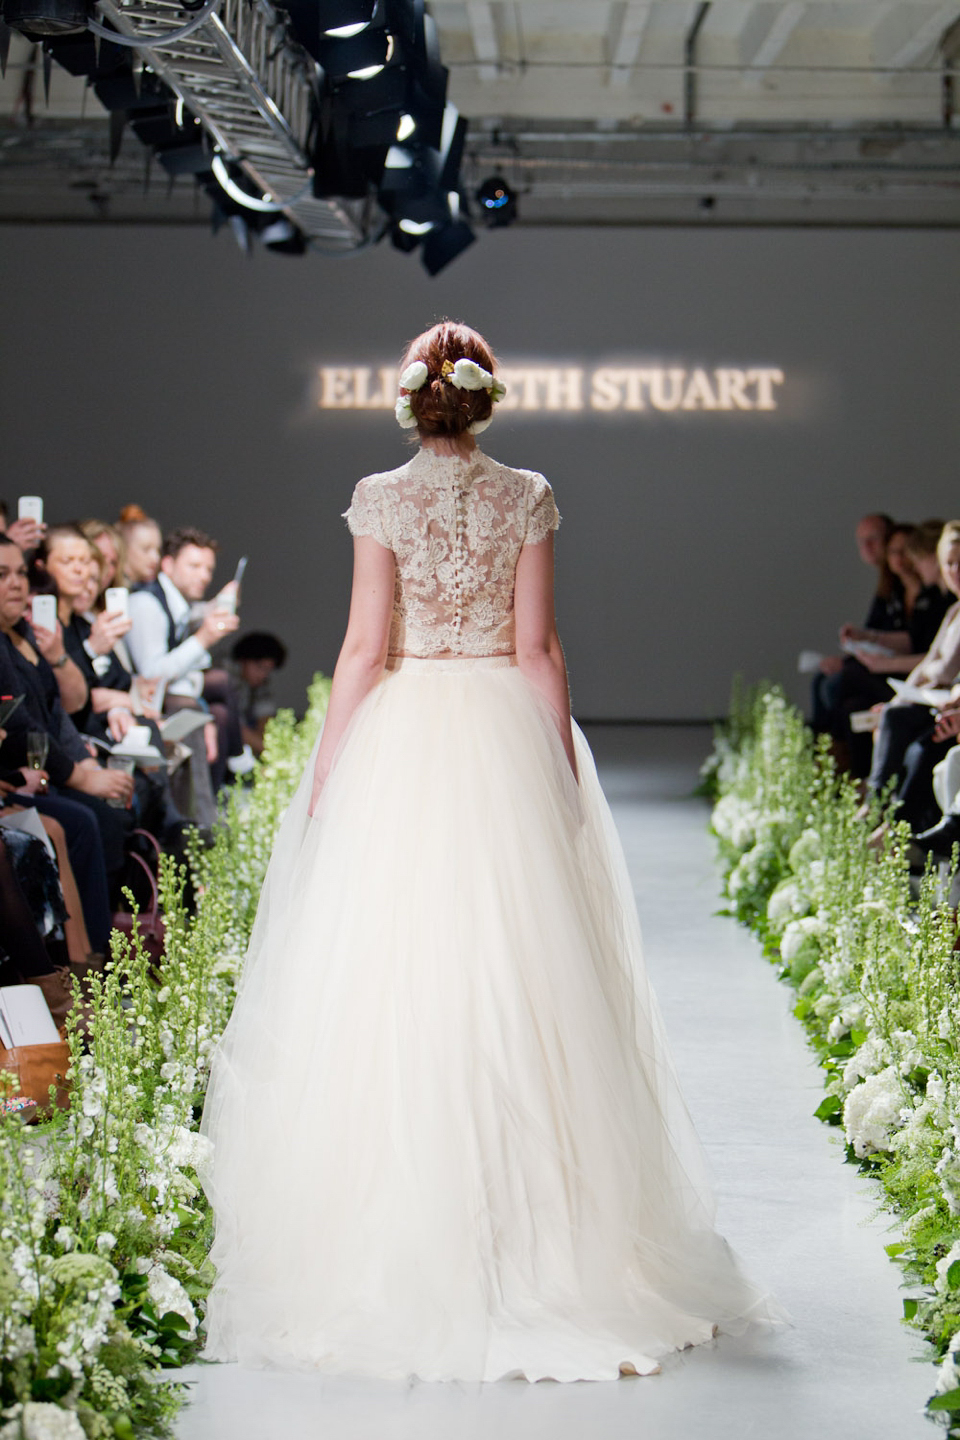 Elizabeth Stuart 'The Enchantment of The Seasons' Autumn/Fall 2014 Bridal Wear Collection // Photography by Catherine Mead